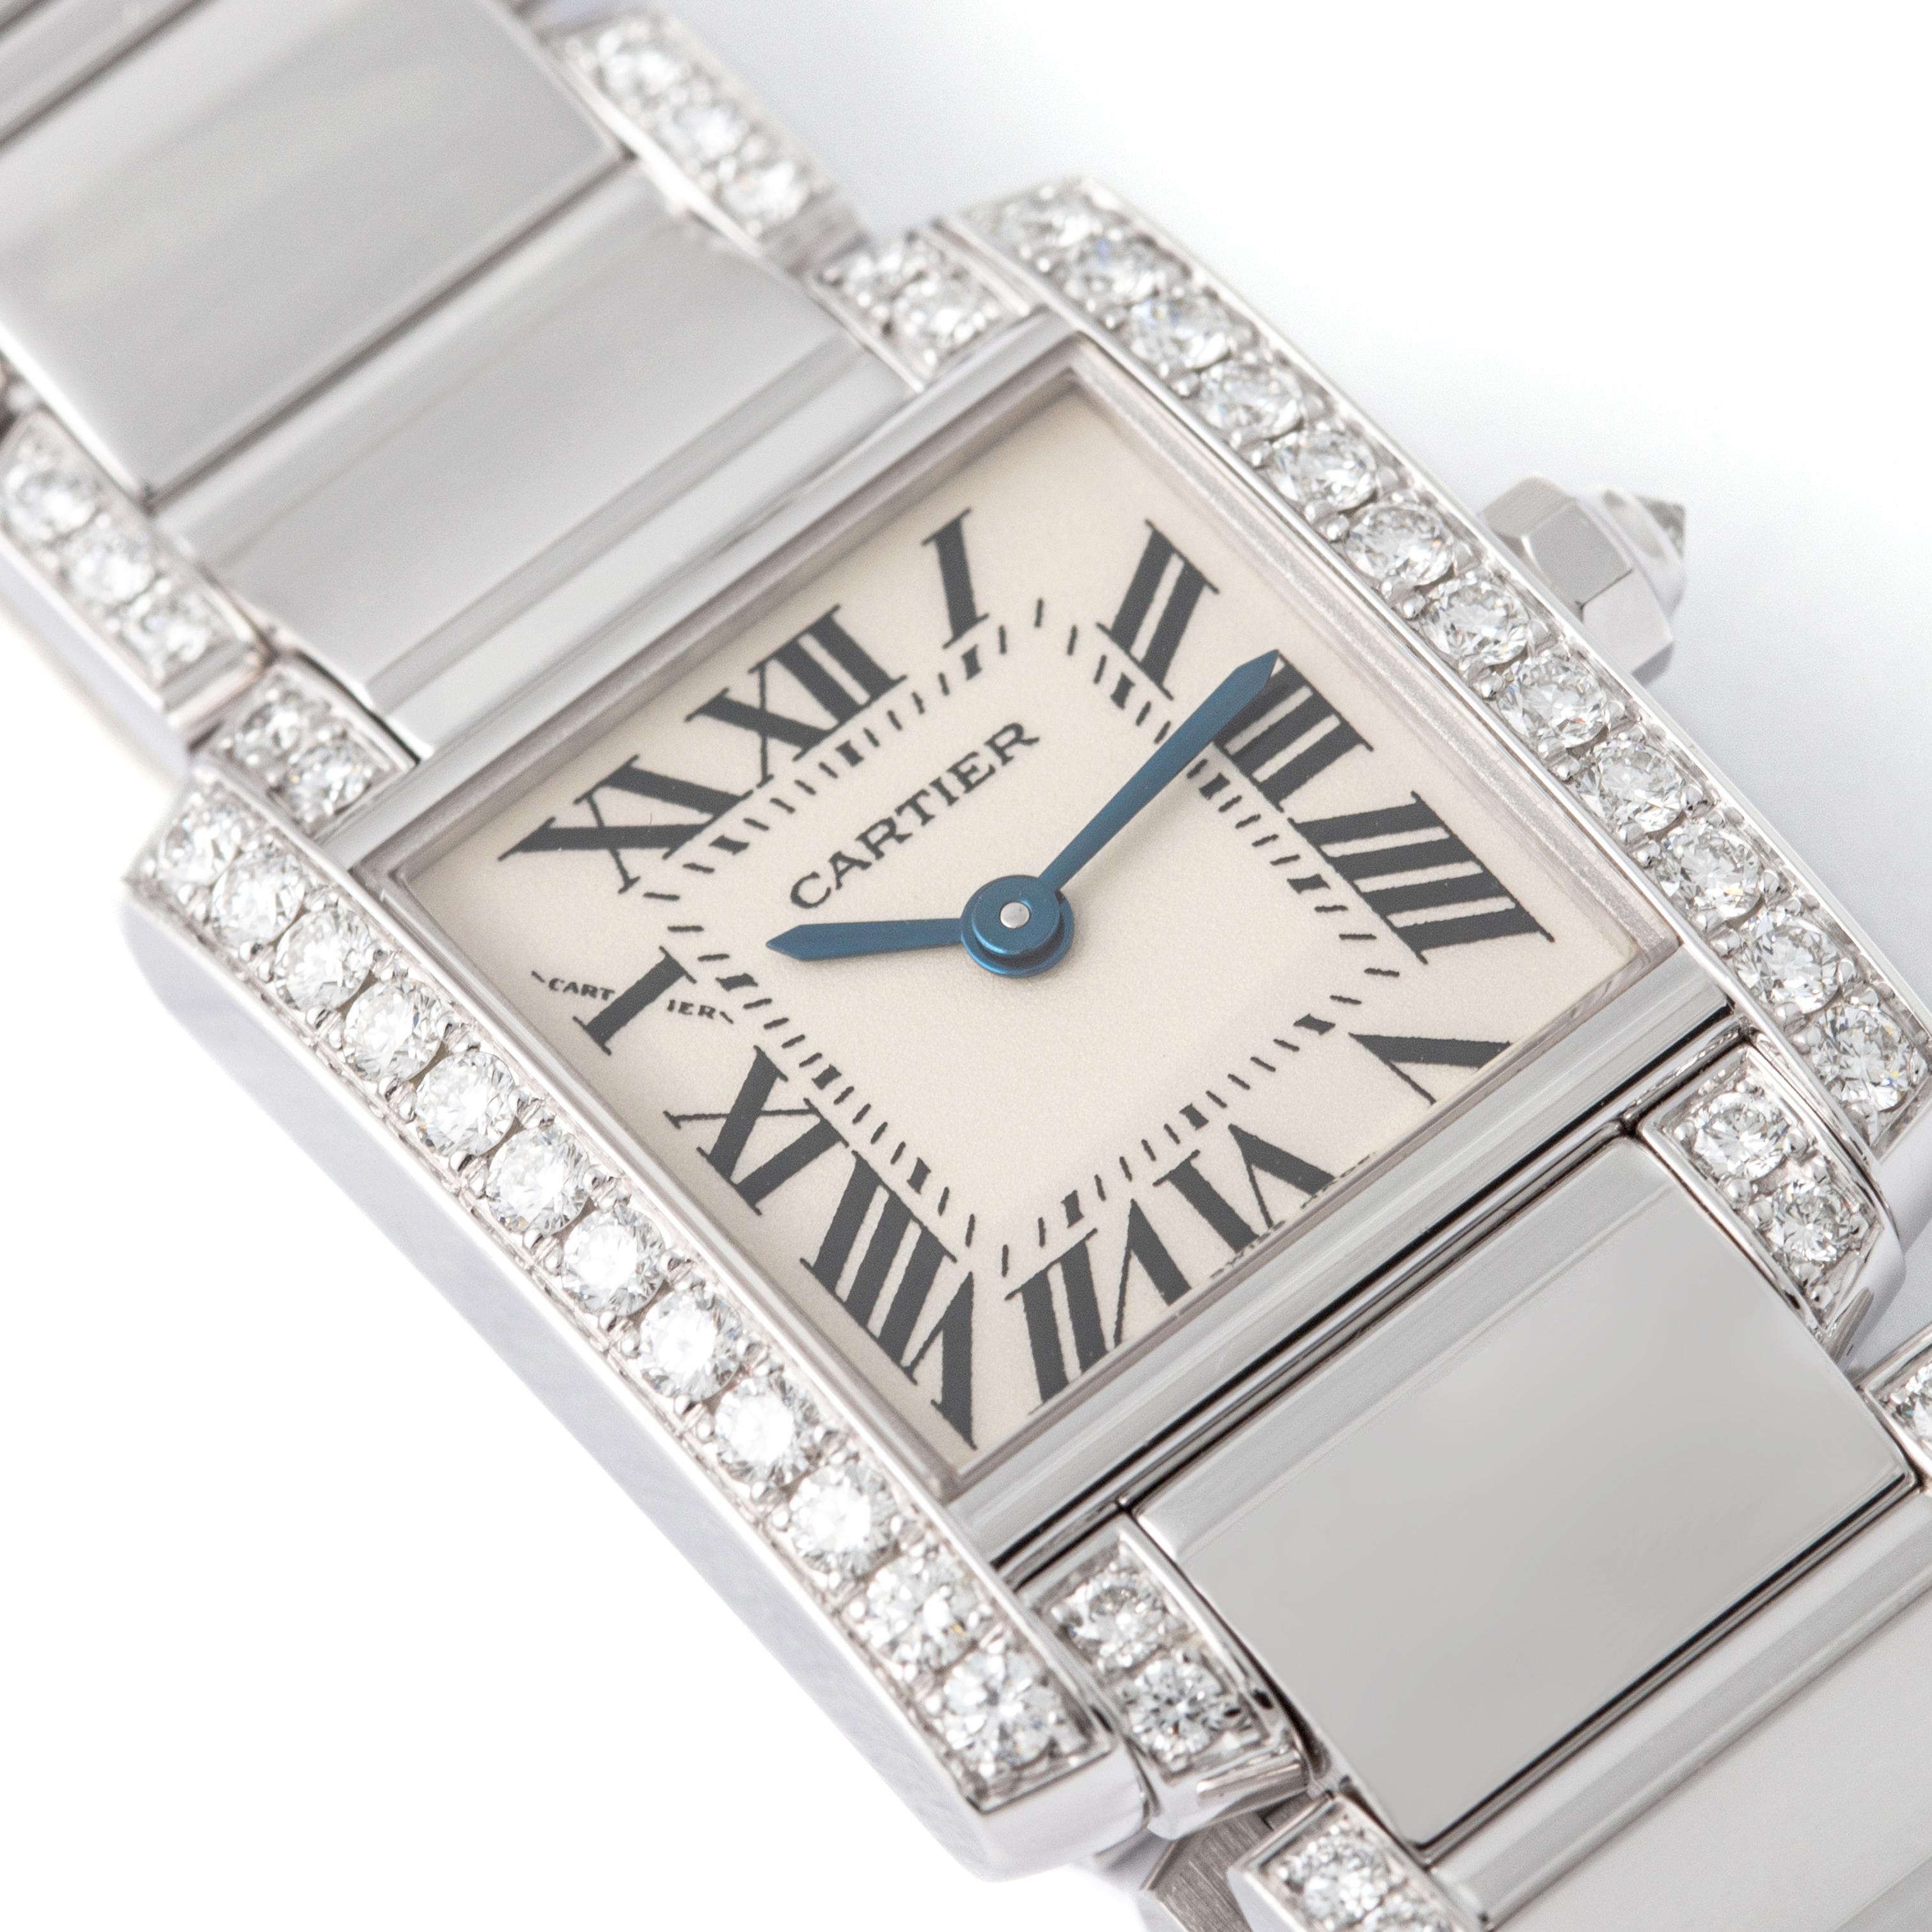 Cartier Tank Francaise White Gold 18K and Diamond Ladies Watch

Authentic Cartier Tank Francaise watch crafted in white gold 18K. The rectangular case is set with high-quality round brilliant cut diamonds and the octagonal crown is set with one